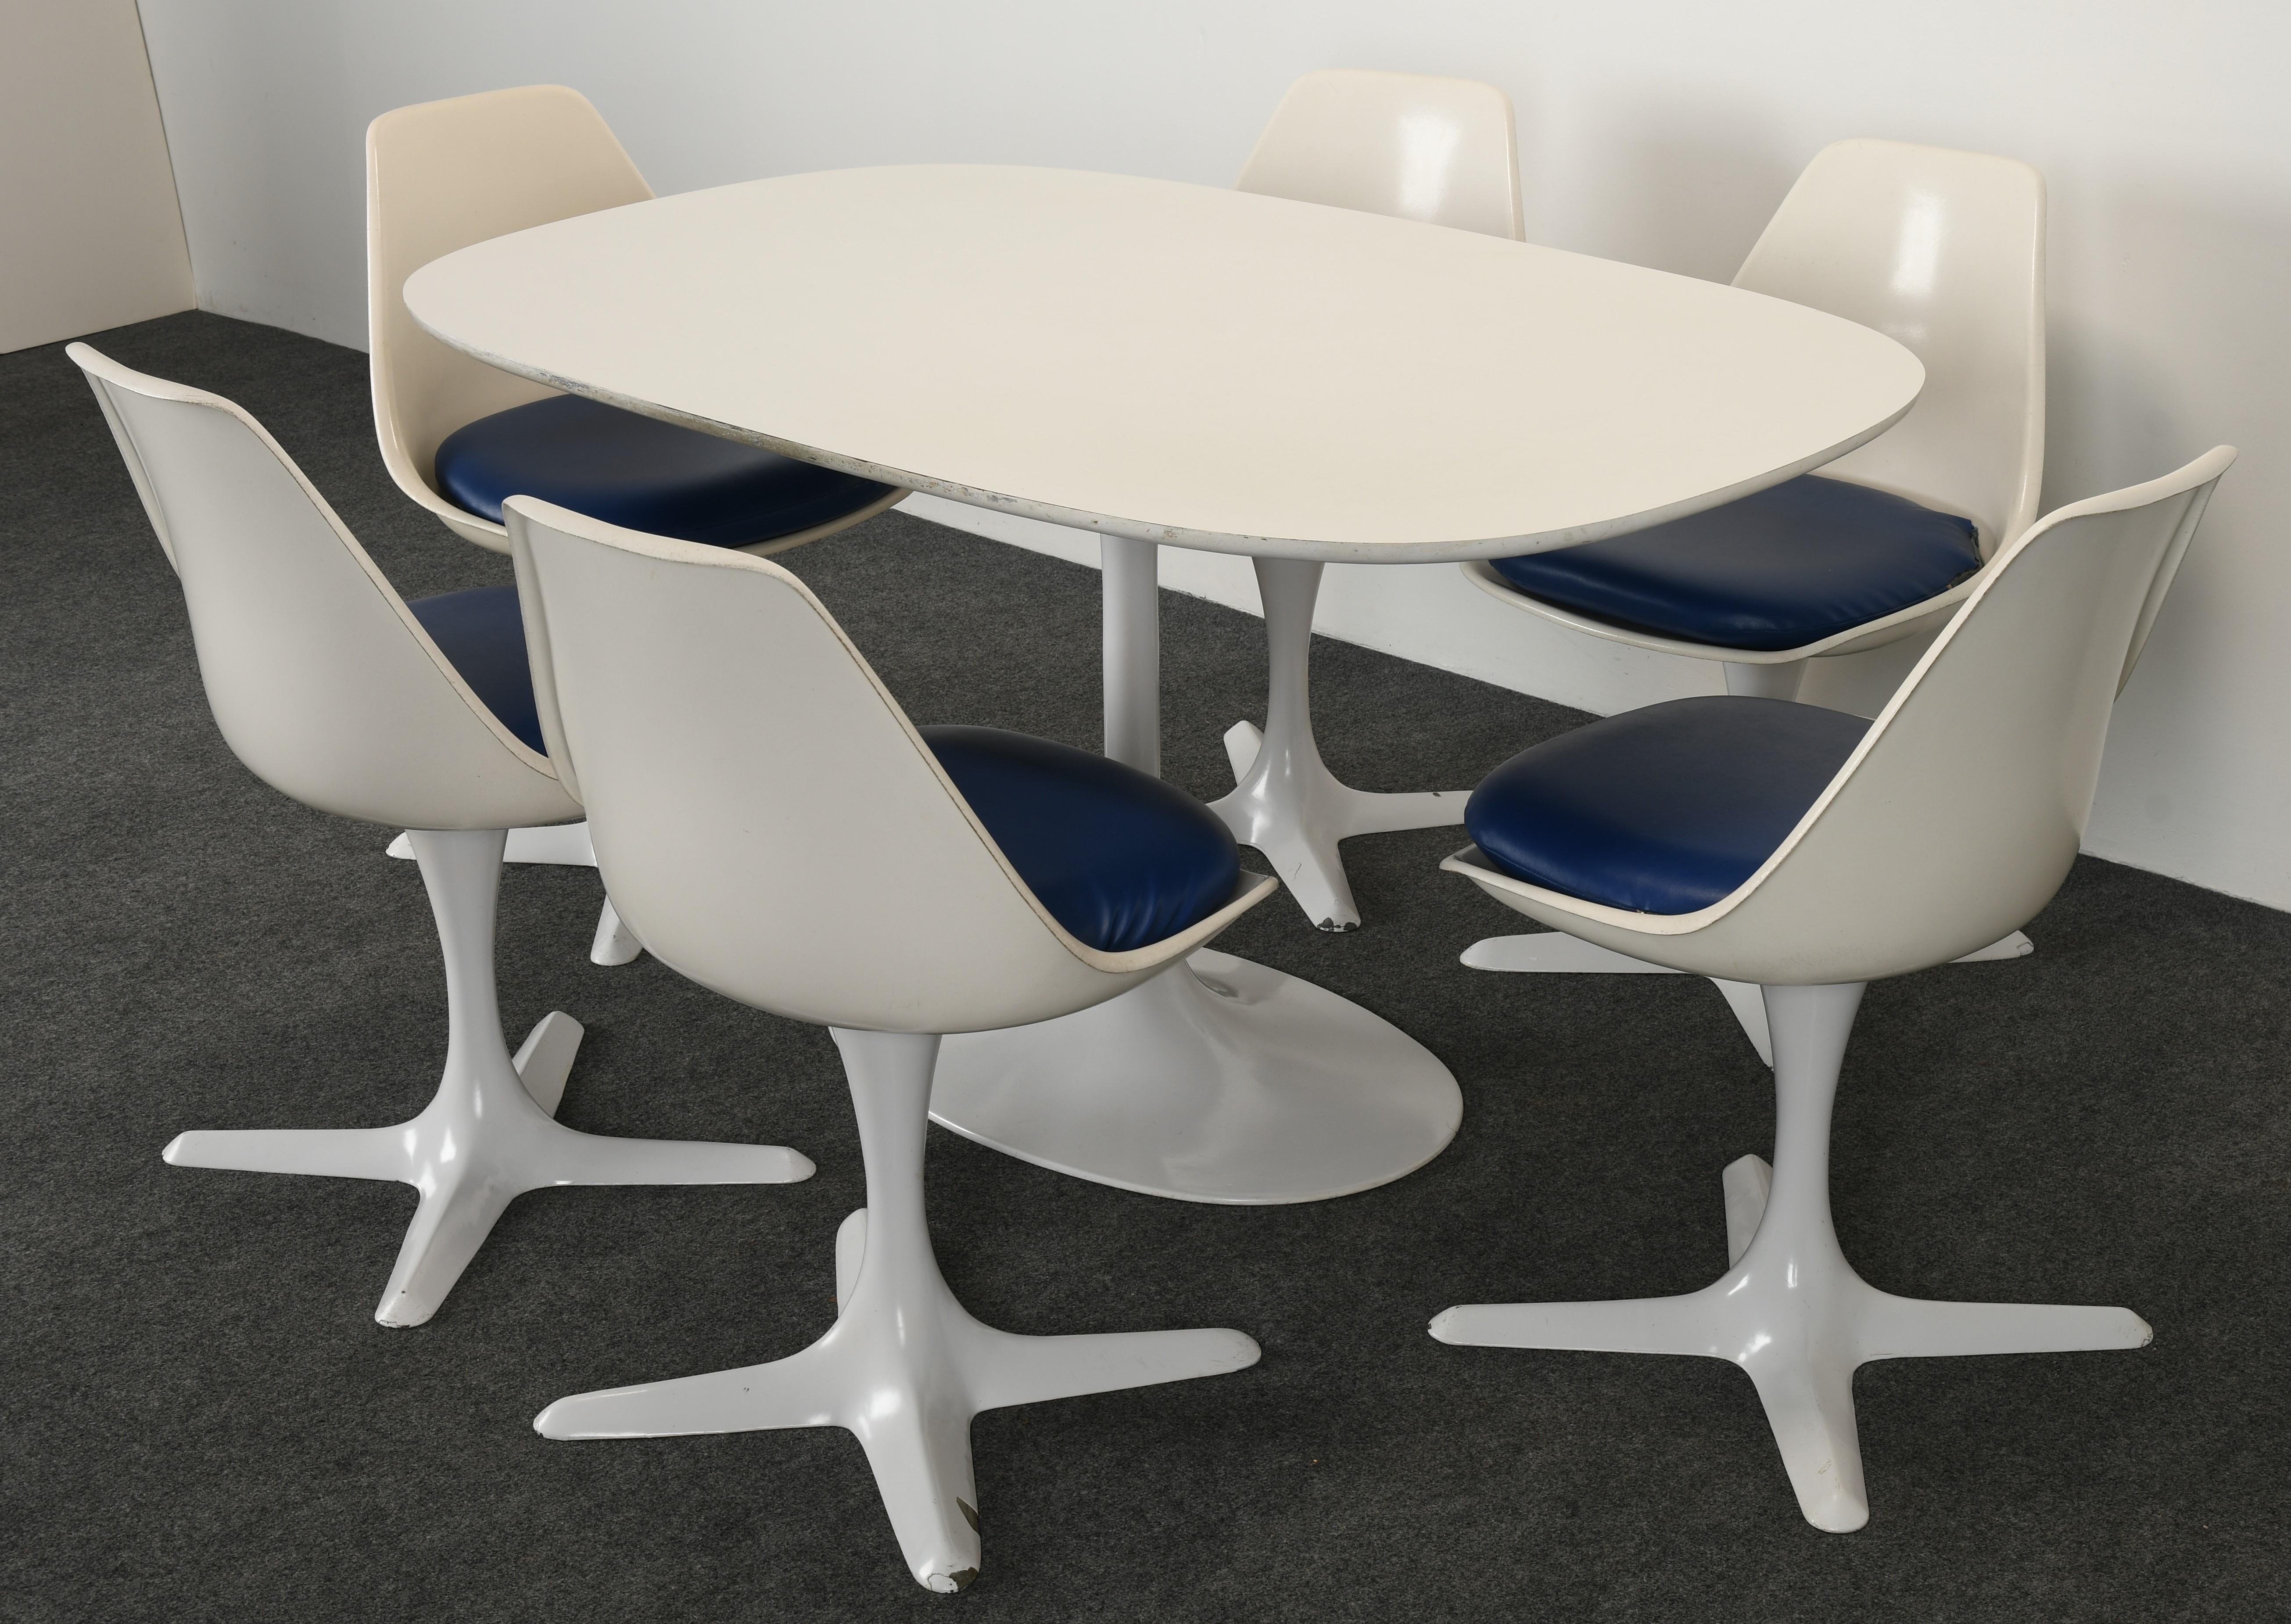 A Modernist Tulip-style table and set of six chairs by Burke International designed by Maurice Burke. This set was modeled after the Eero Saarinen tulip series. The set consists of a dining table and four molded fiberglass swiveling dining chairs.